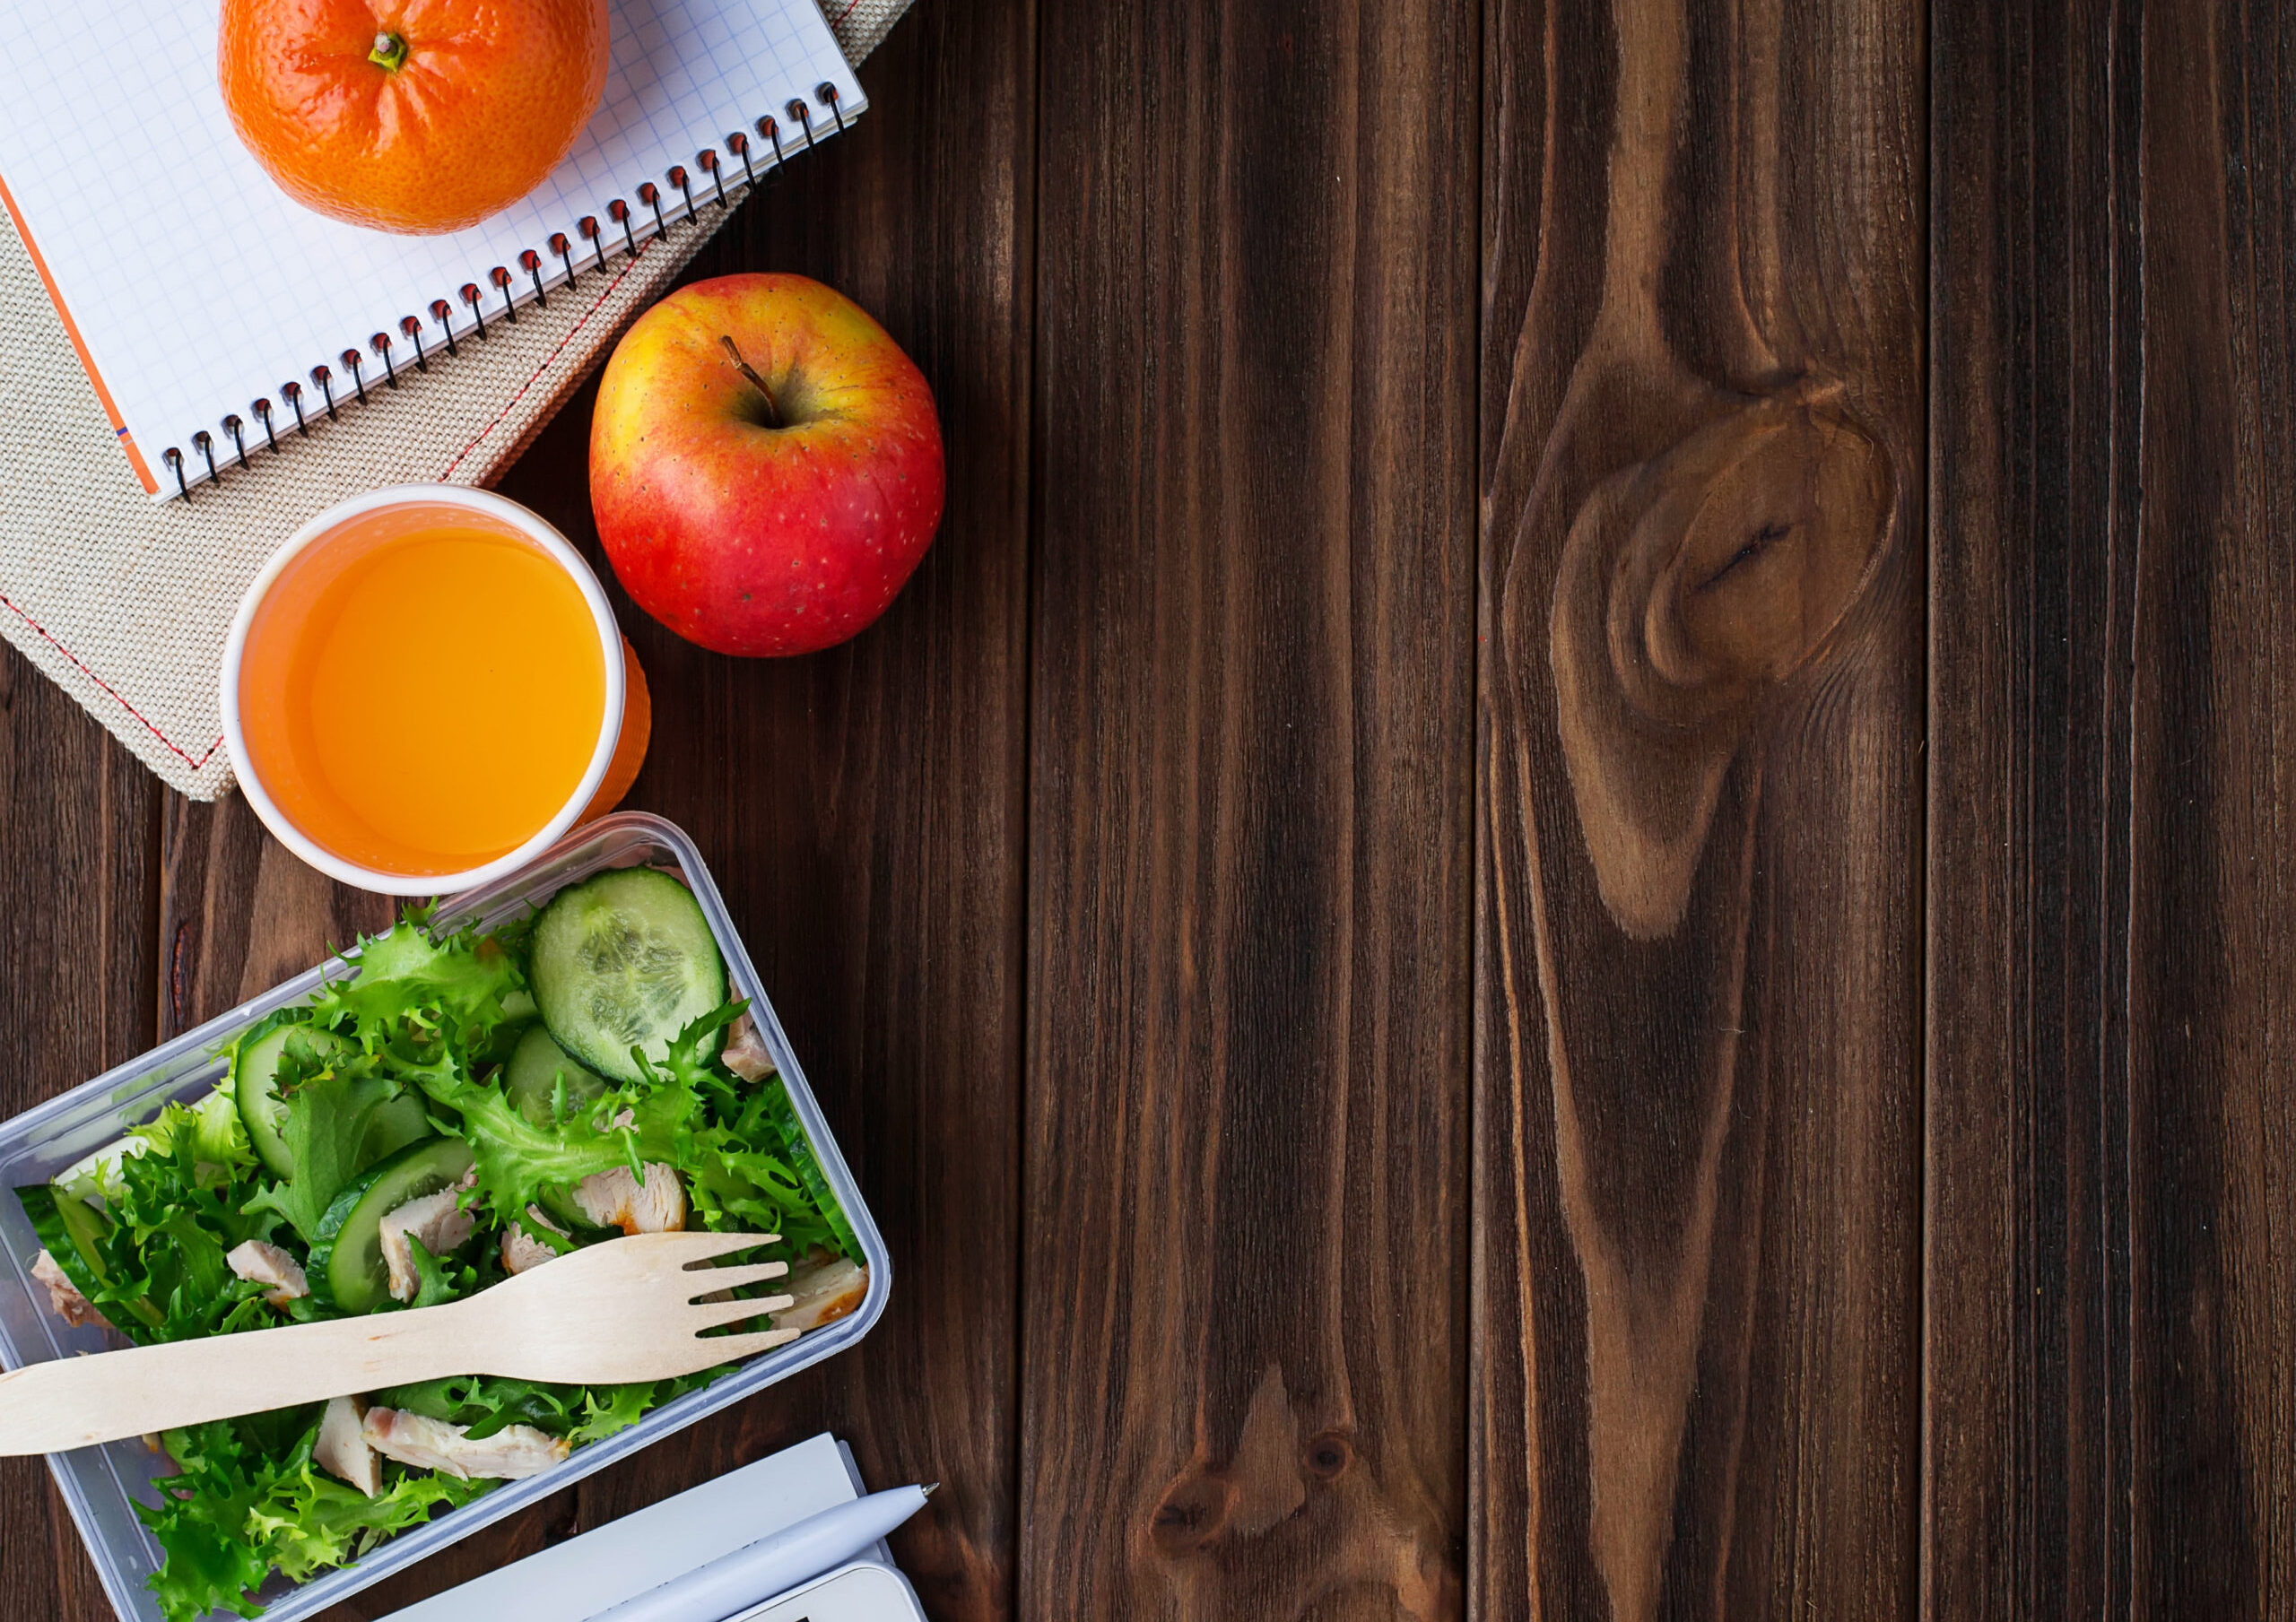 Lunch box with salad, apple, tangerine and juice.